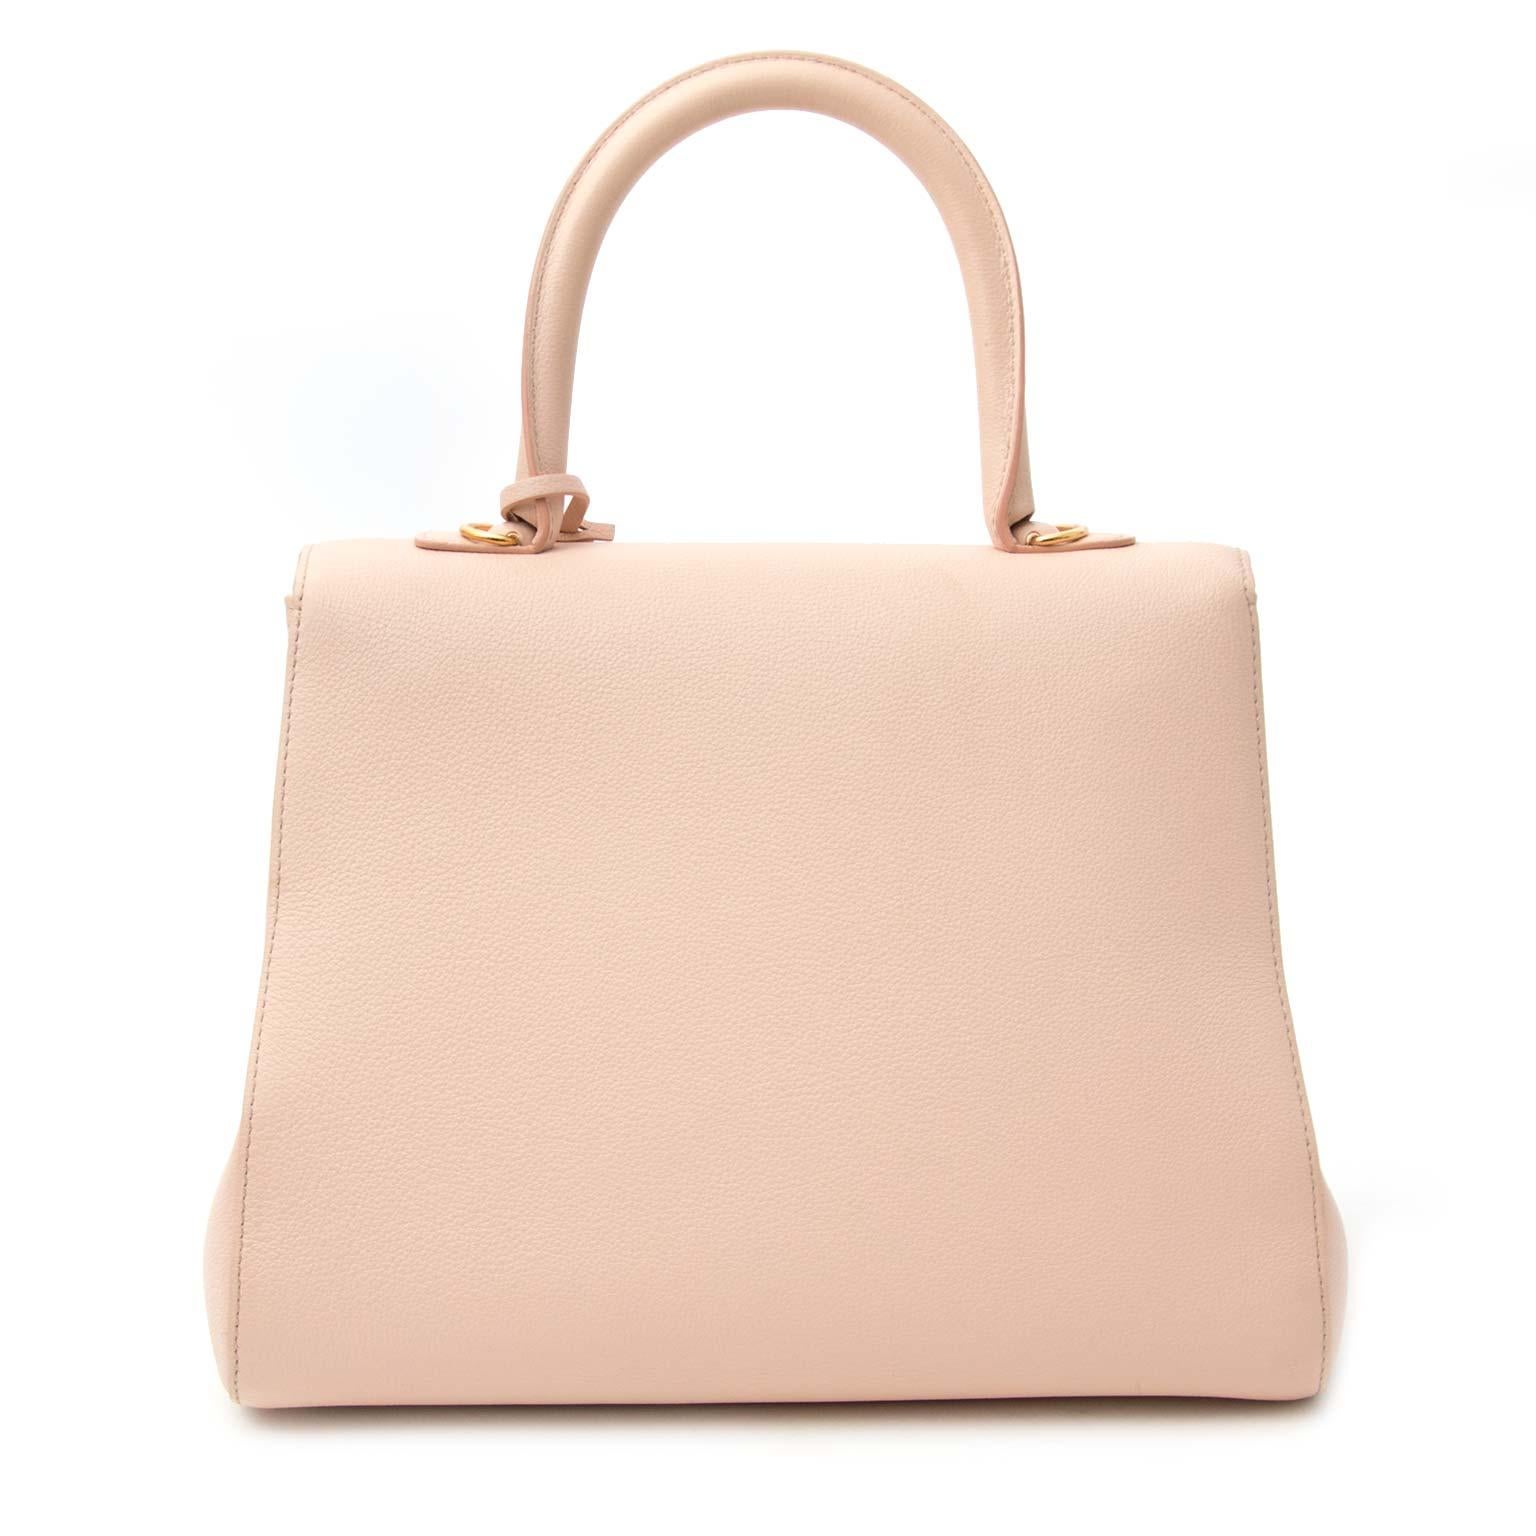 Very Good Condition

est retail price €4600,-

Delvaux Nude Brillant MM + Strap

This beautiful Delvaux Brillant bag is a real musthave! the bag comes in a adorable soft pink 